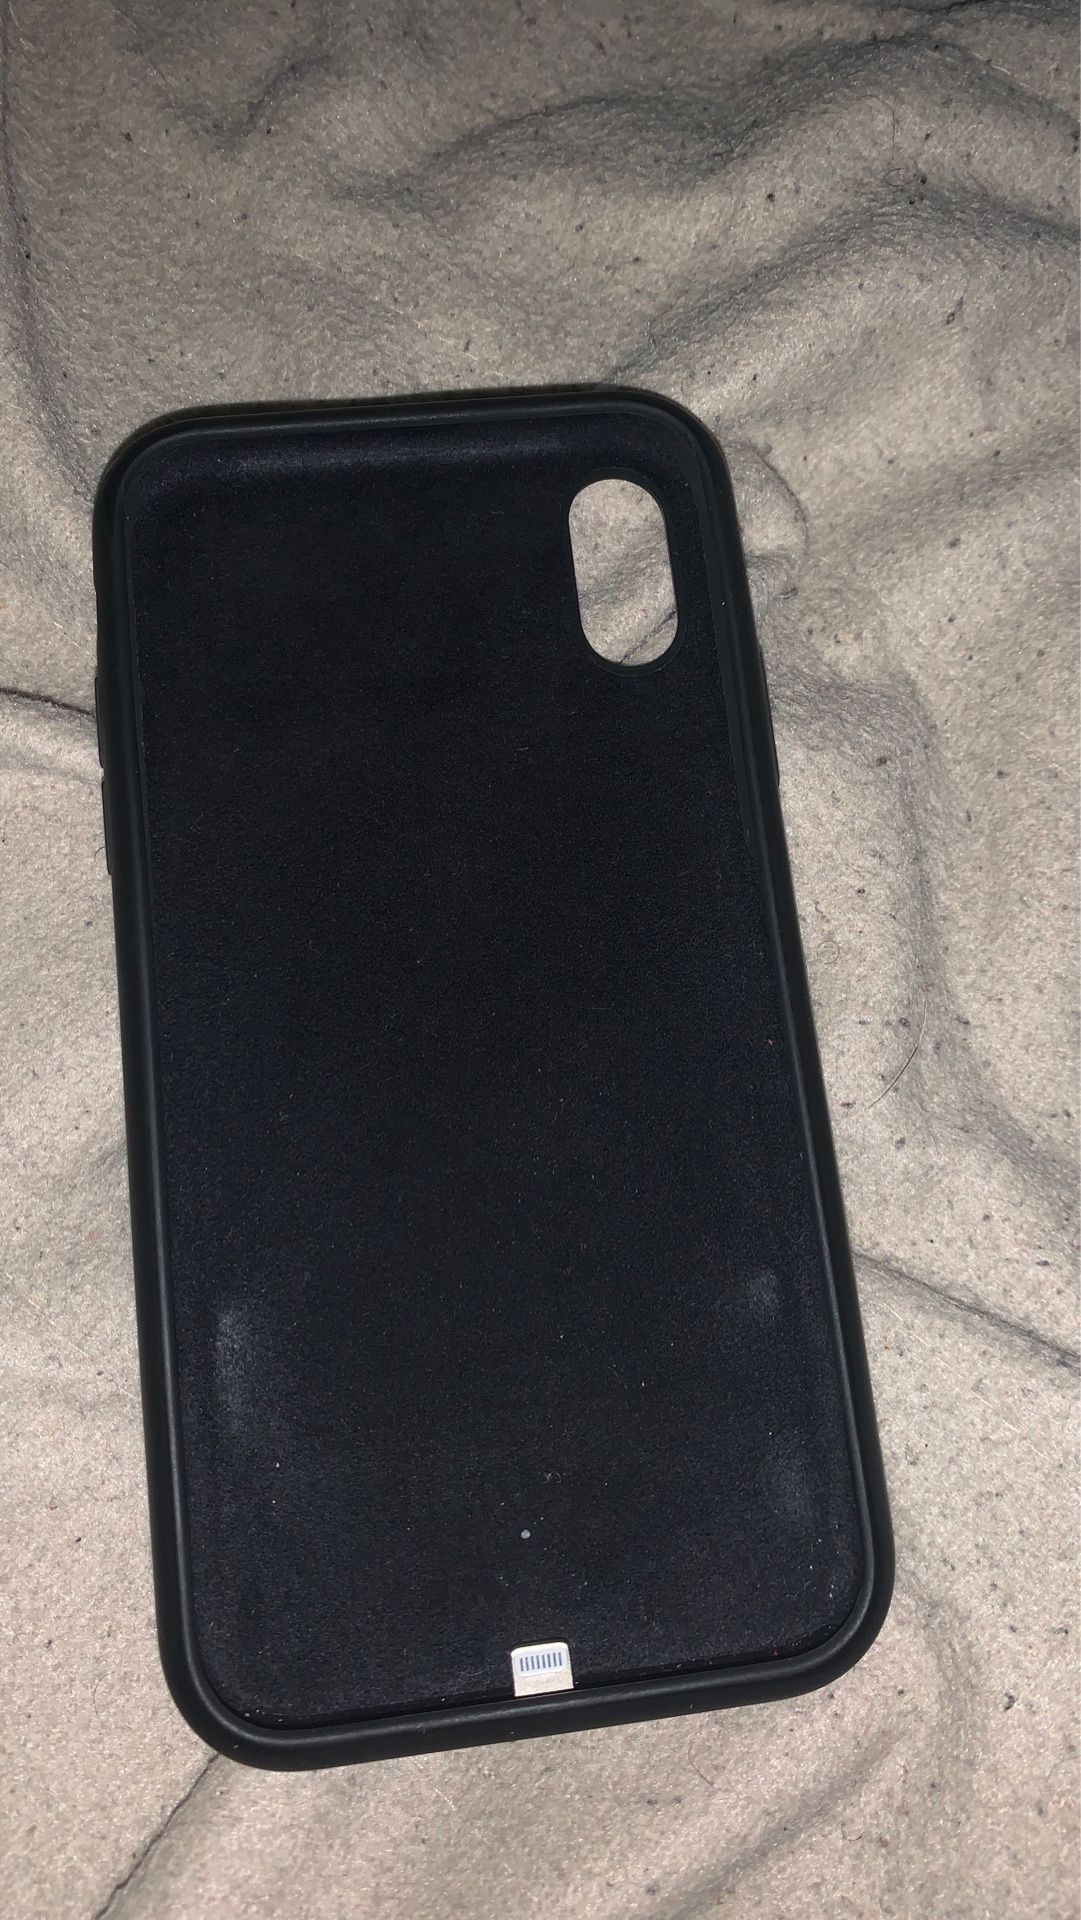 Iphone xr smart charging case